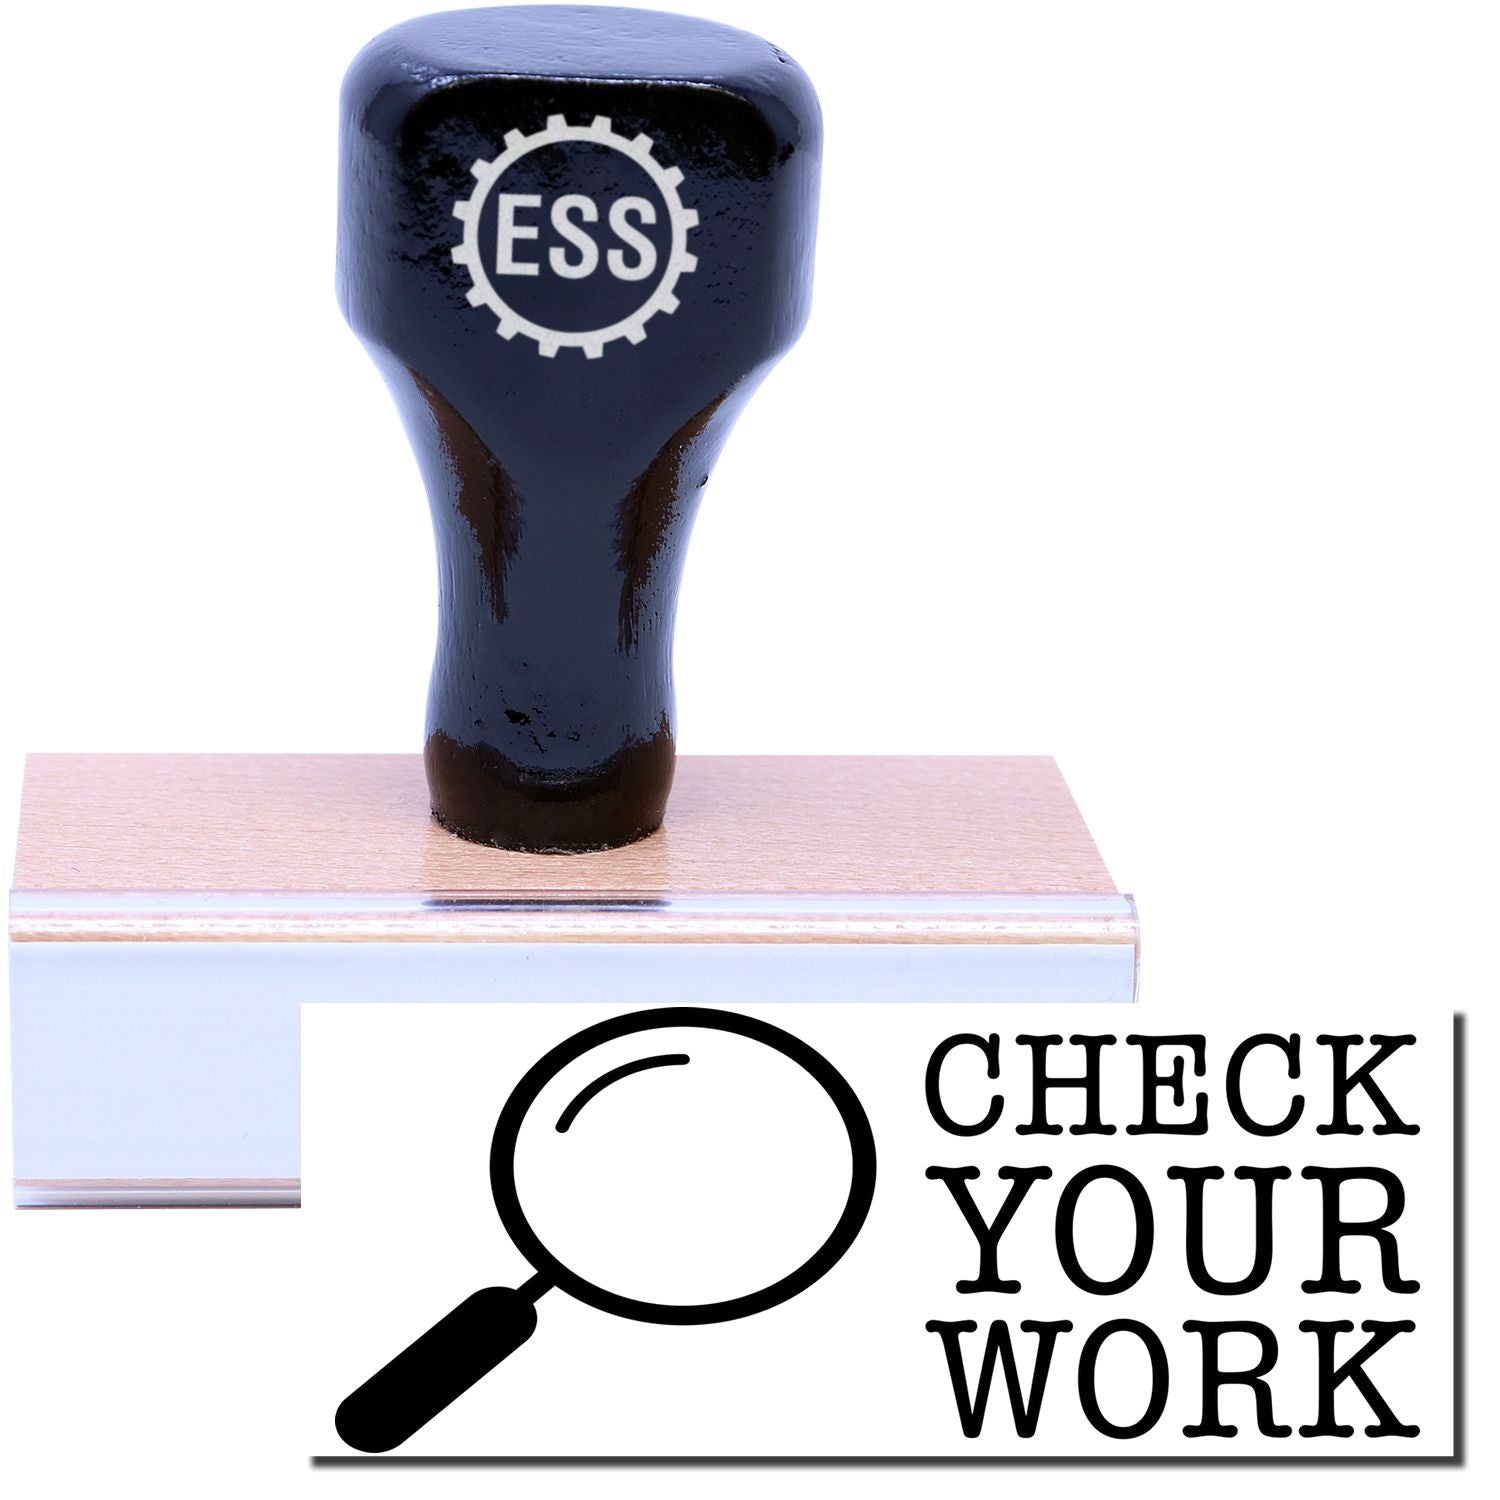 A stock office rubber stamp with a stamped image showing how the text "CHECK YOUR WORK" with a detective glass on the left is displayed after stamping.